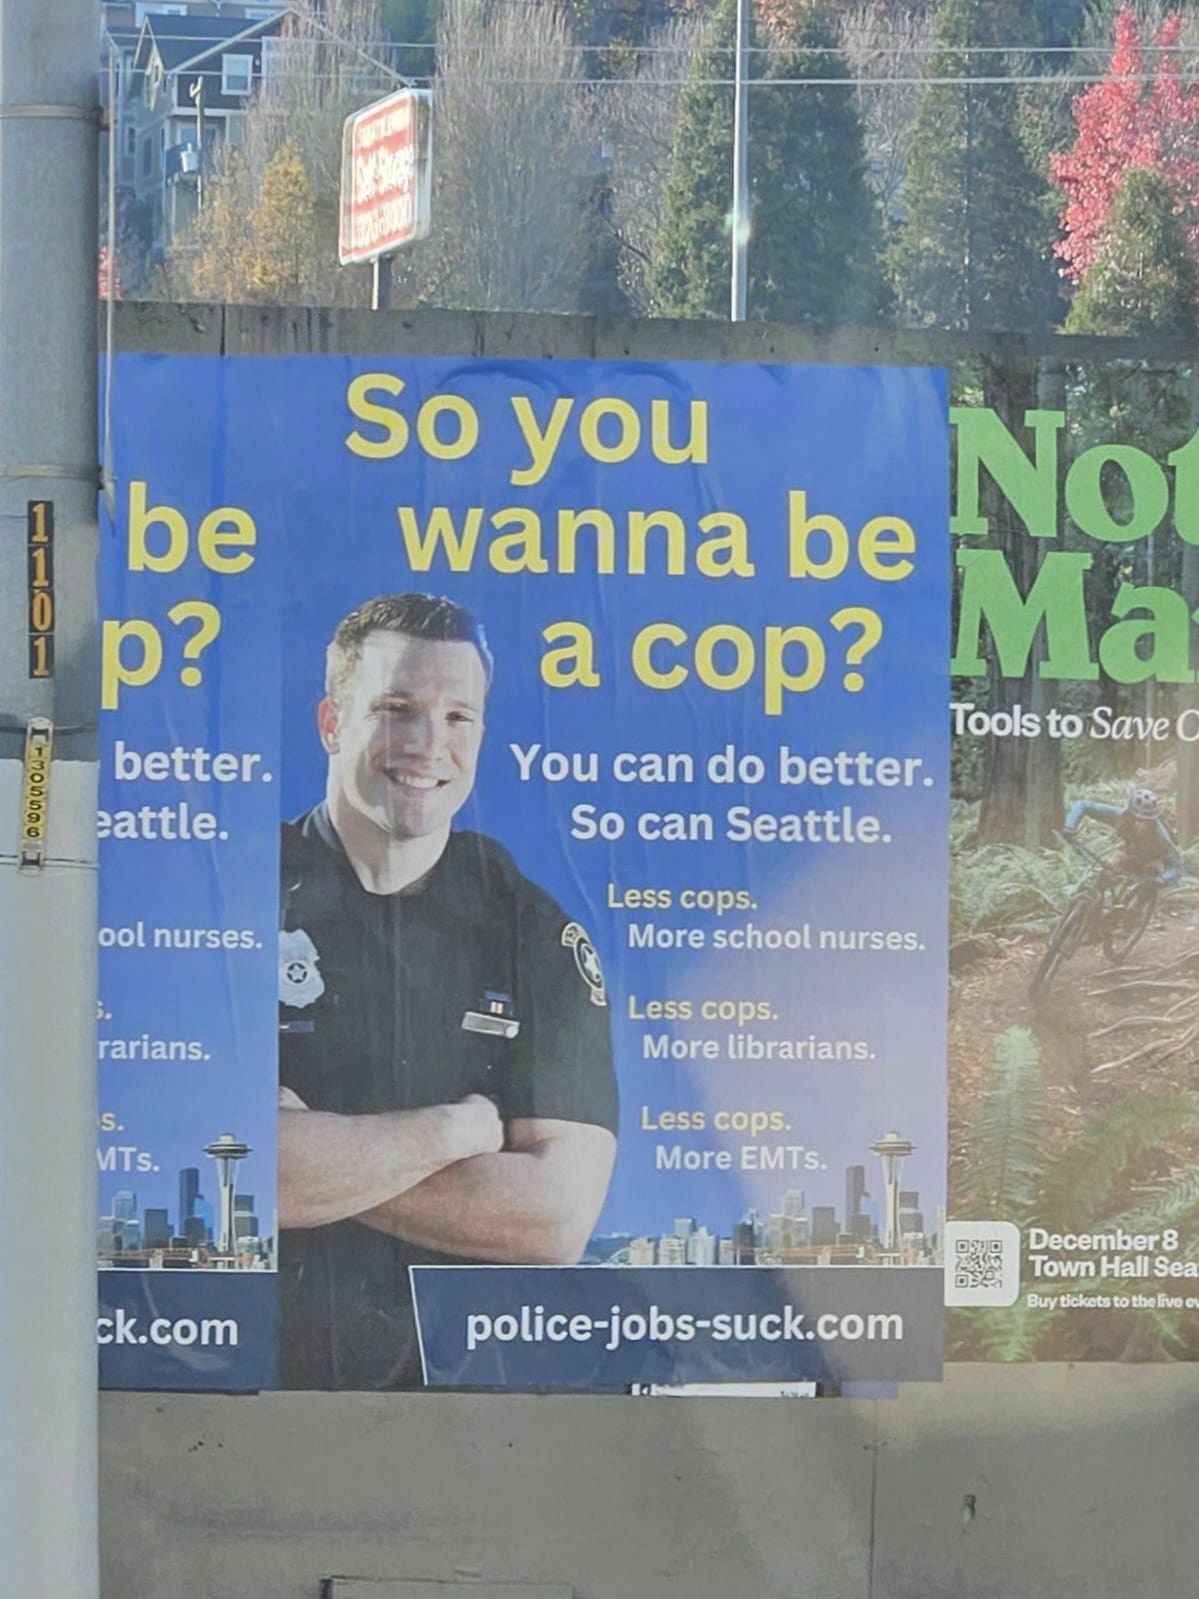 Picture of a poster with a smiling white cop with his arms folded. The Seattle skyline is in the background. The text reads "So you wanna be a cop? You can do better. So can Seattle. Less cops. More school nurses. Less cops. More librarians. Less cops. <br />More EMTs. police-jobs-suck.com"